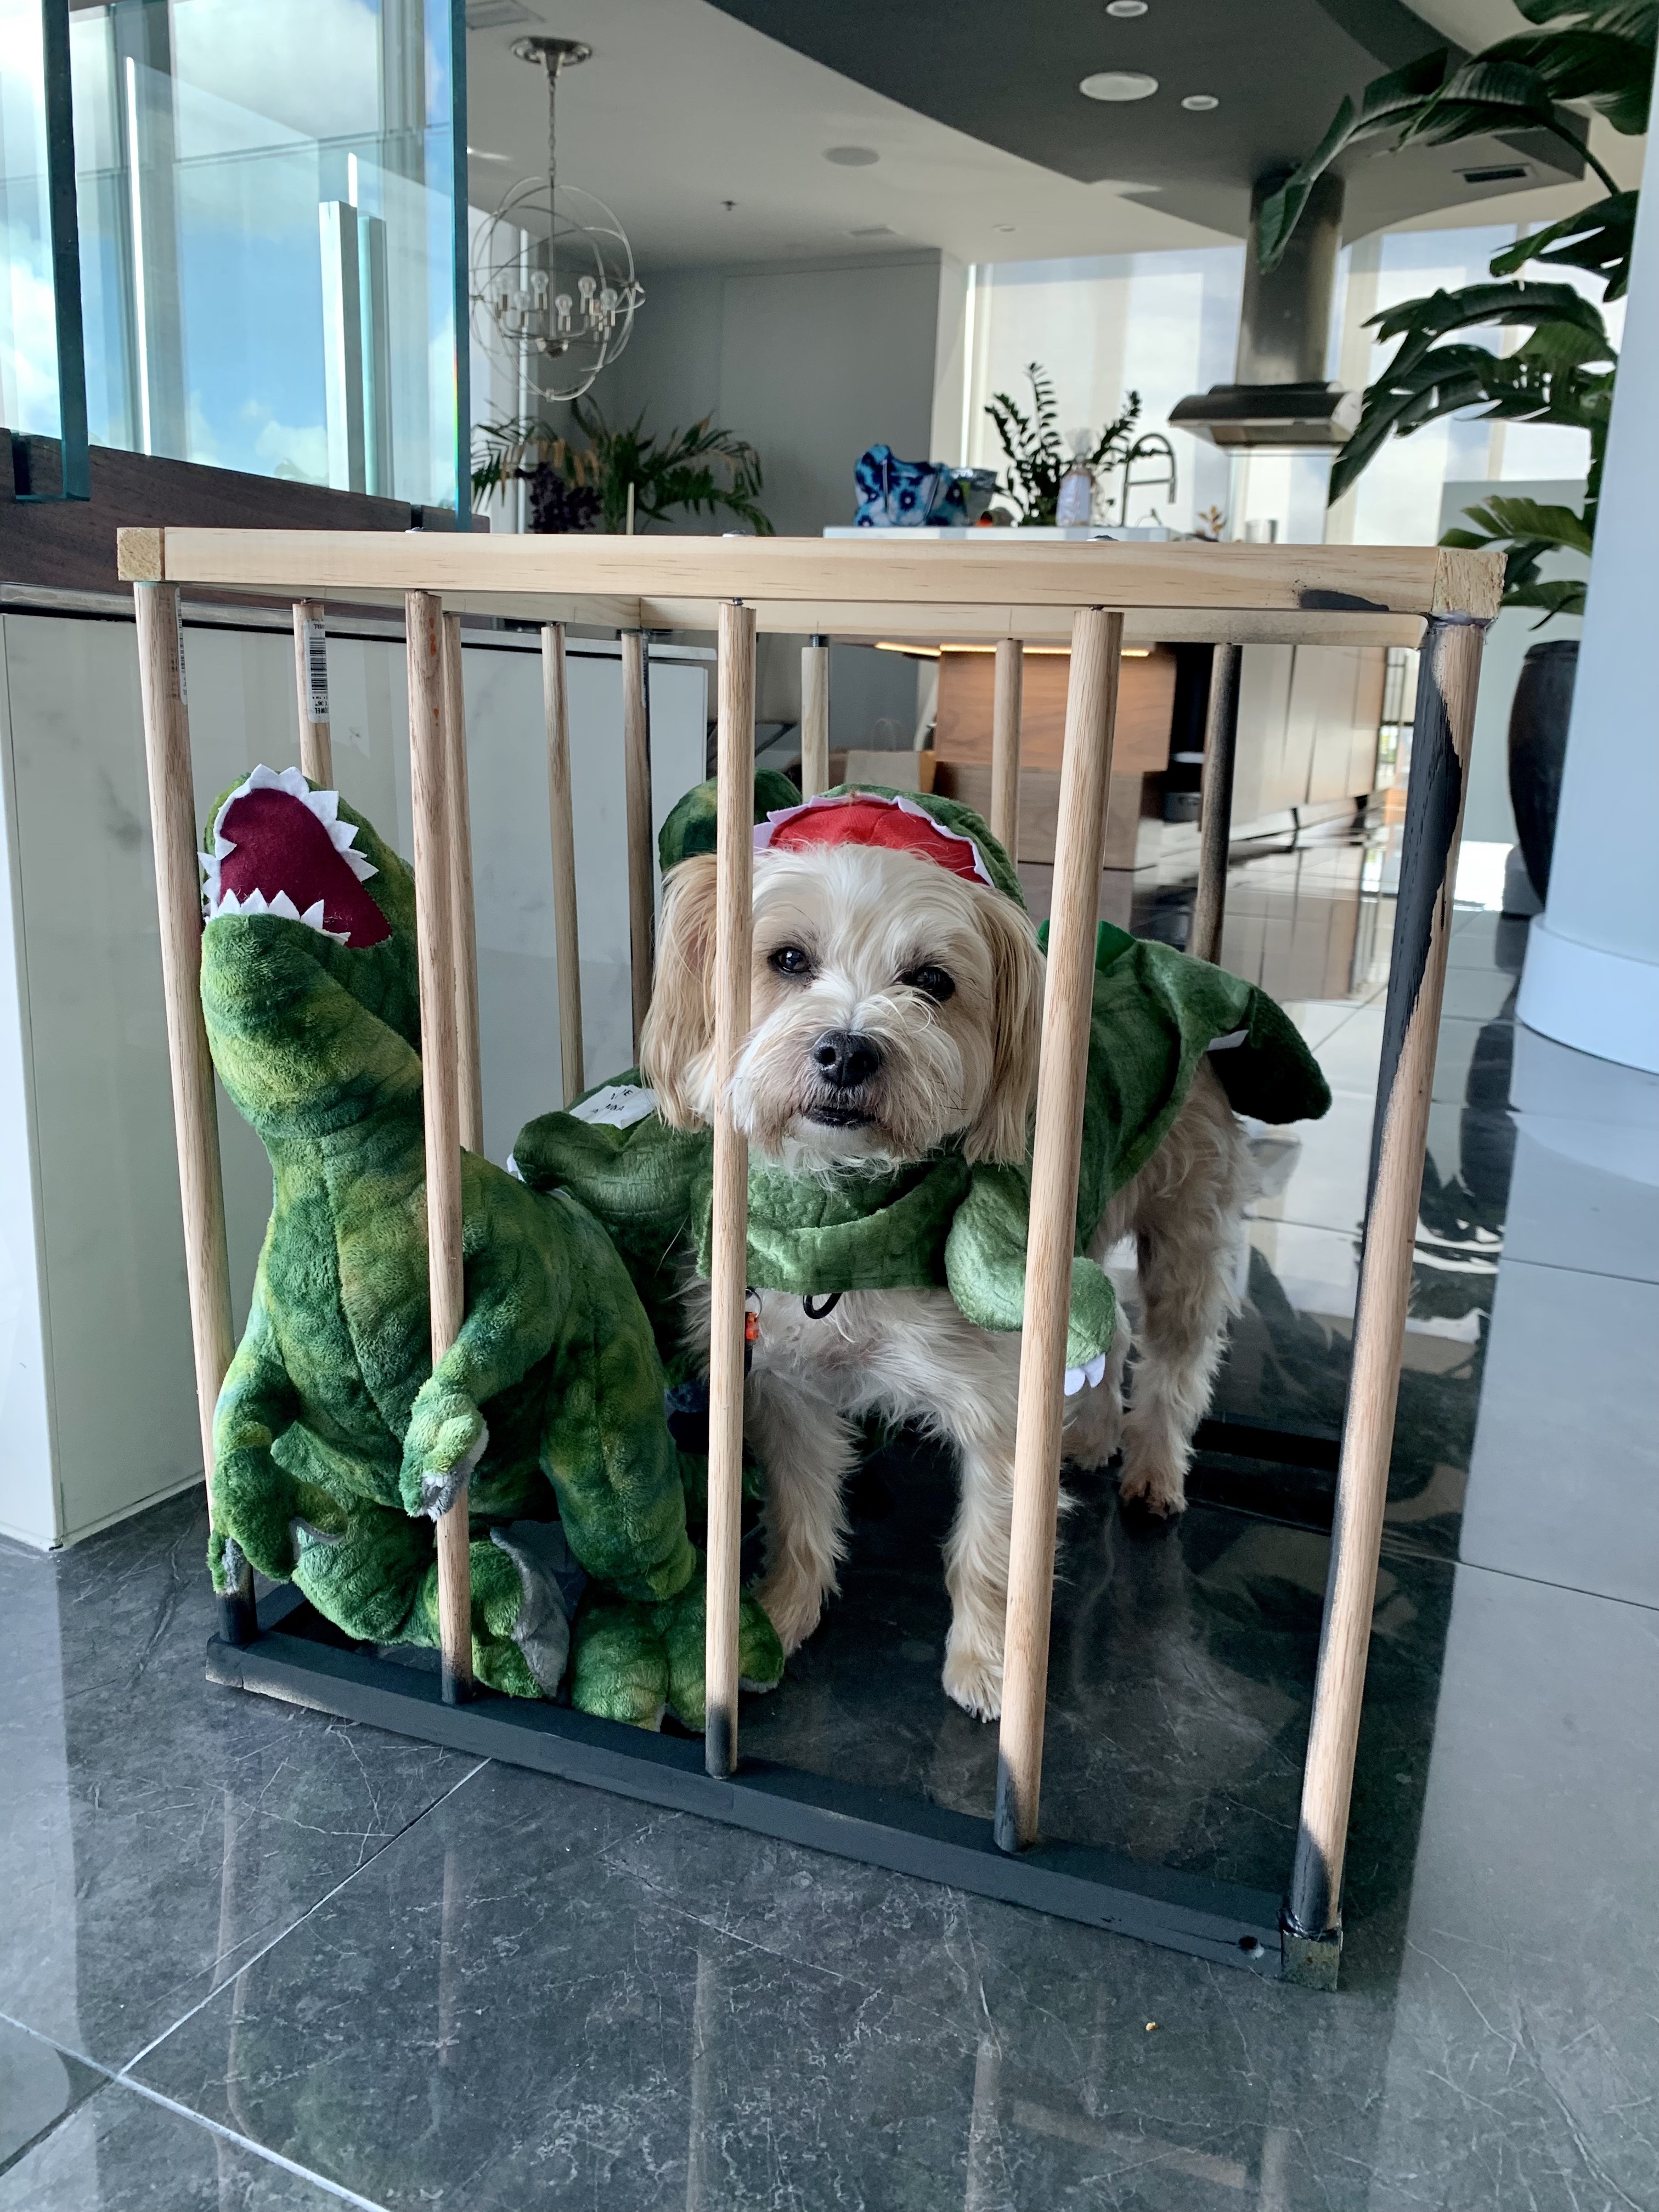 Easy Family Jurassic Park Halloween Costume Ideas With Your Dog